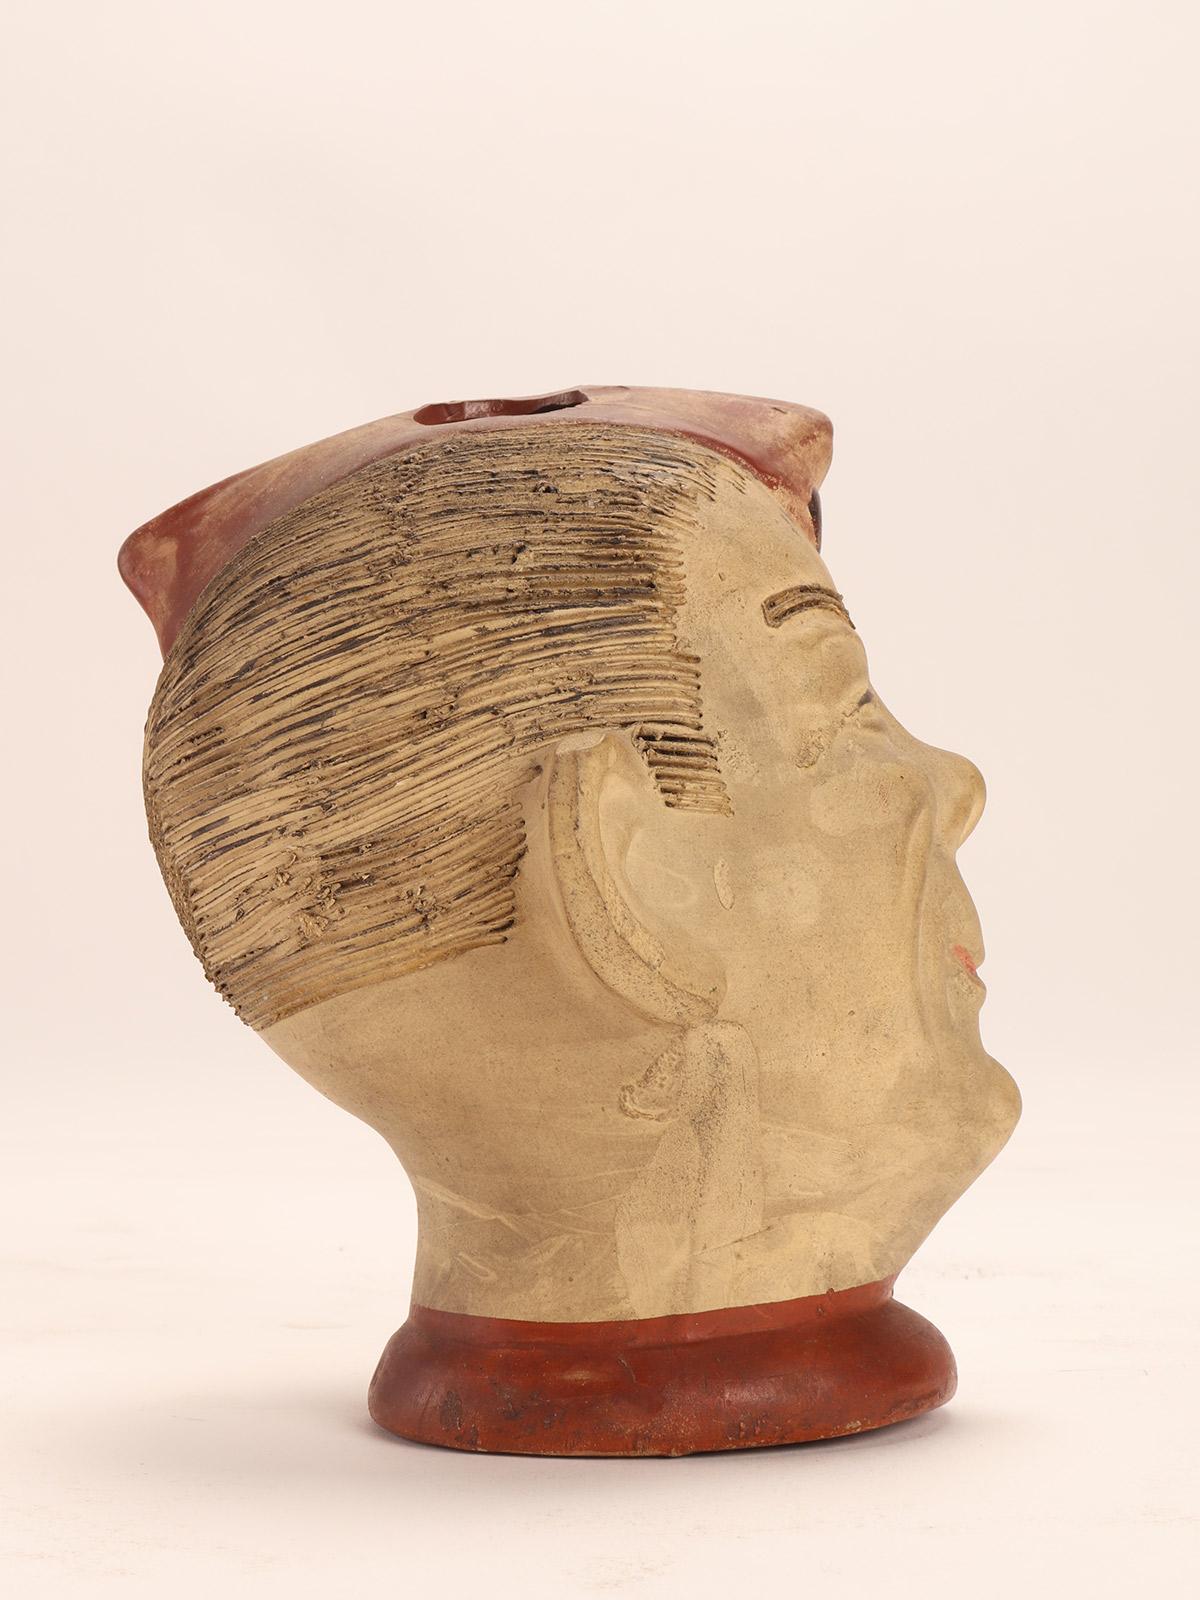 Mid-20th Century Terracotta Vase by Elmer, Depicting a Soldier’s Head, Ohio, Usa 1940’s  For Sale